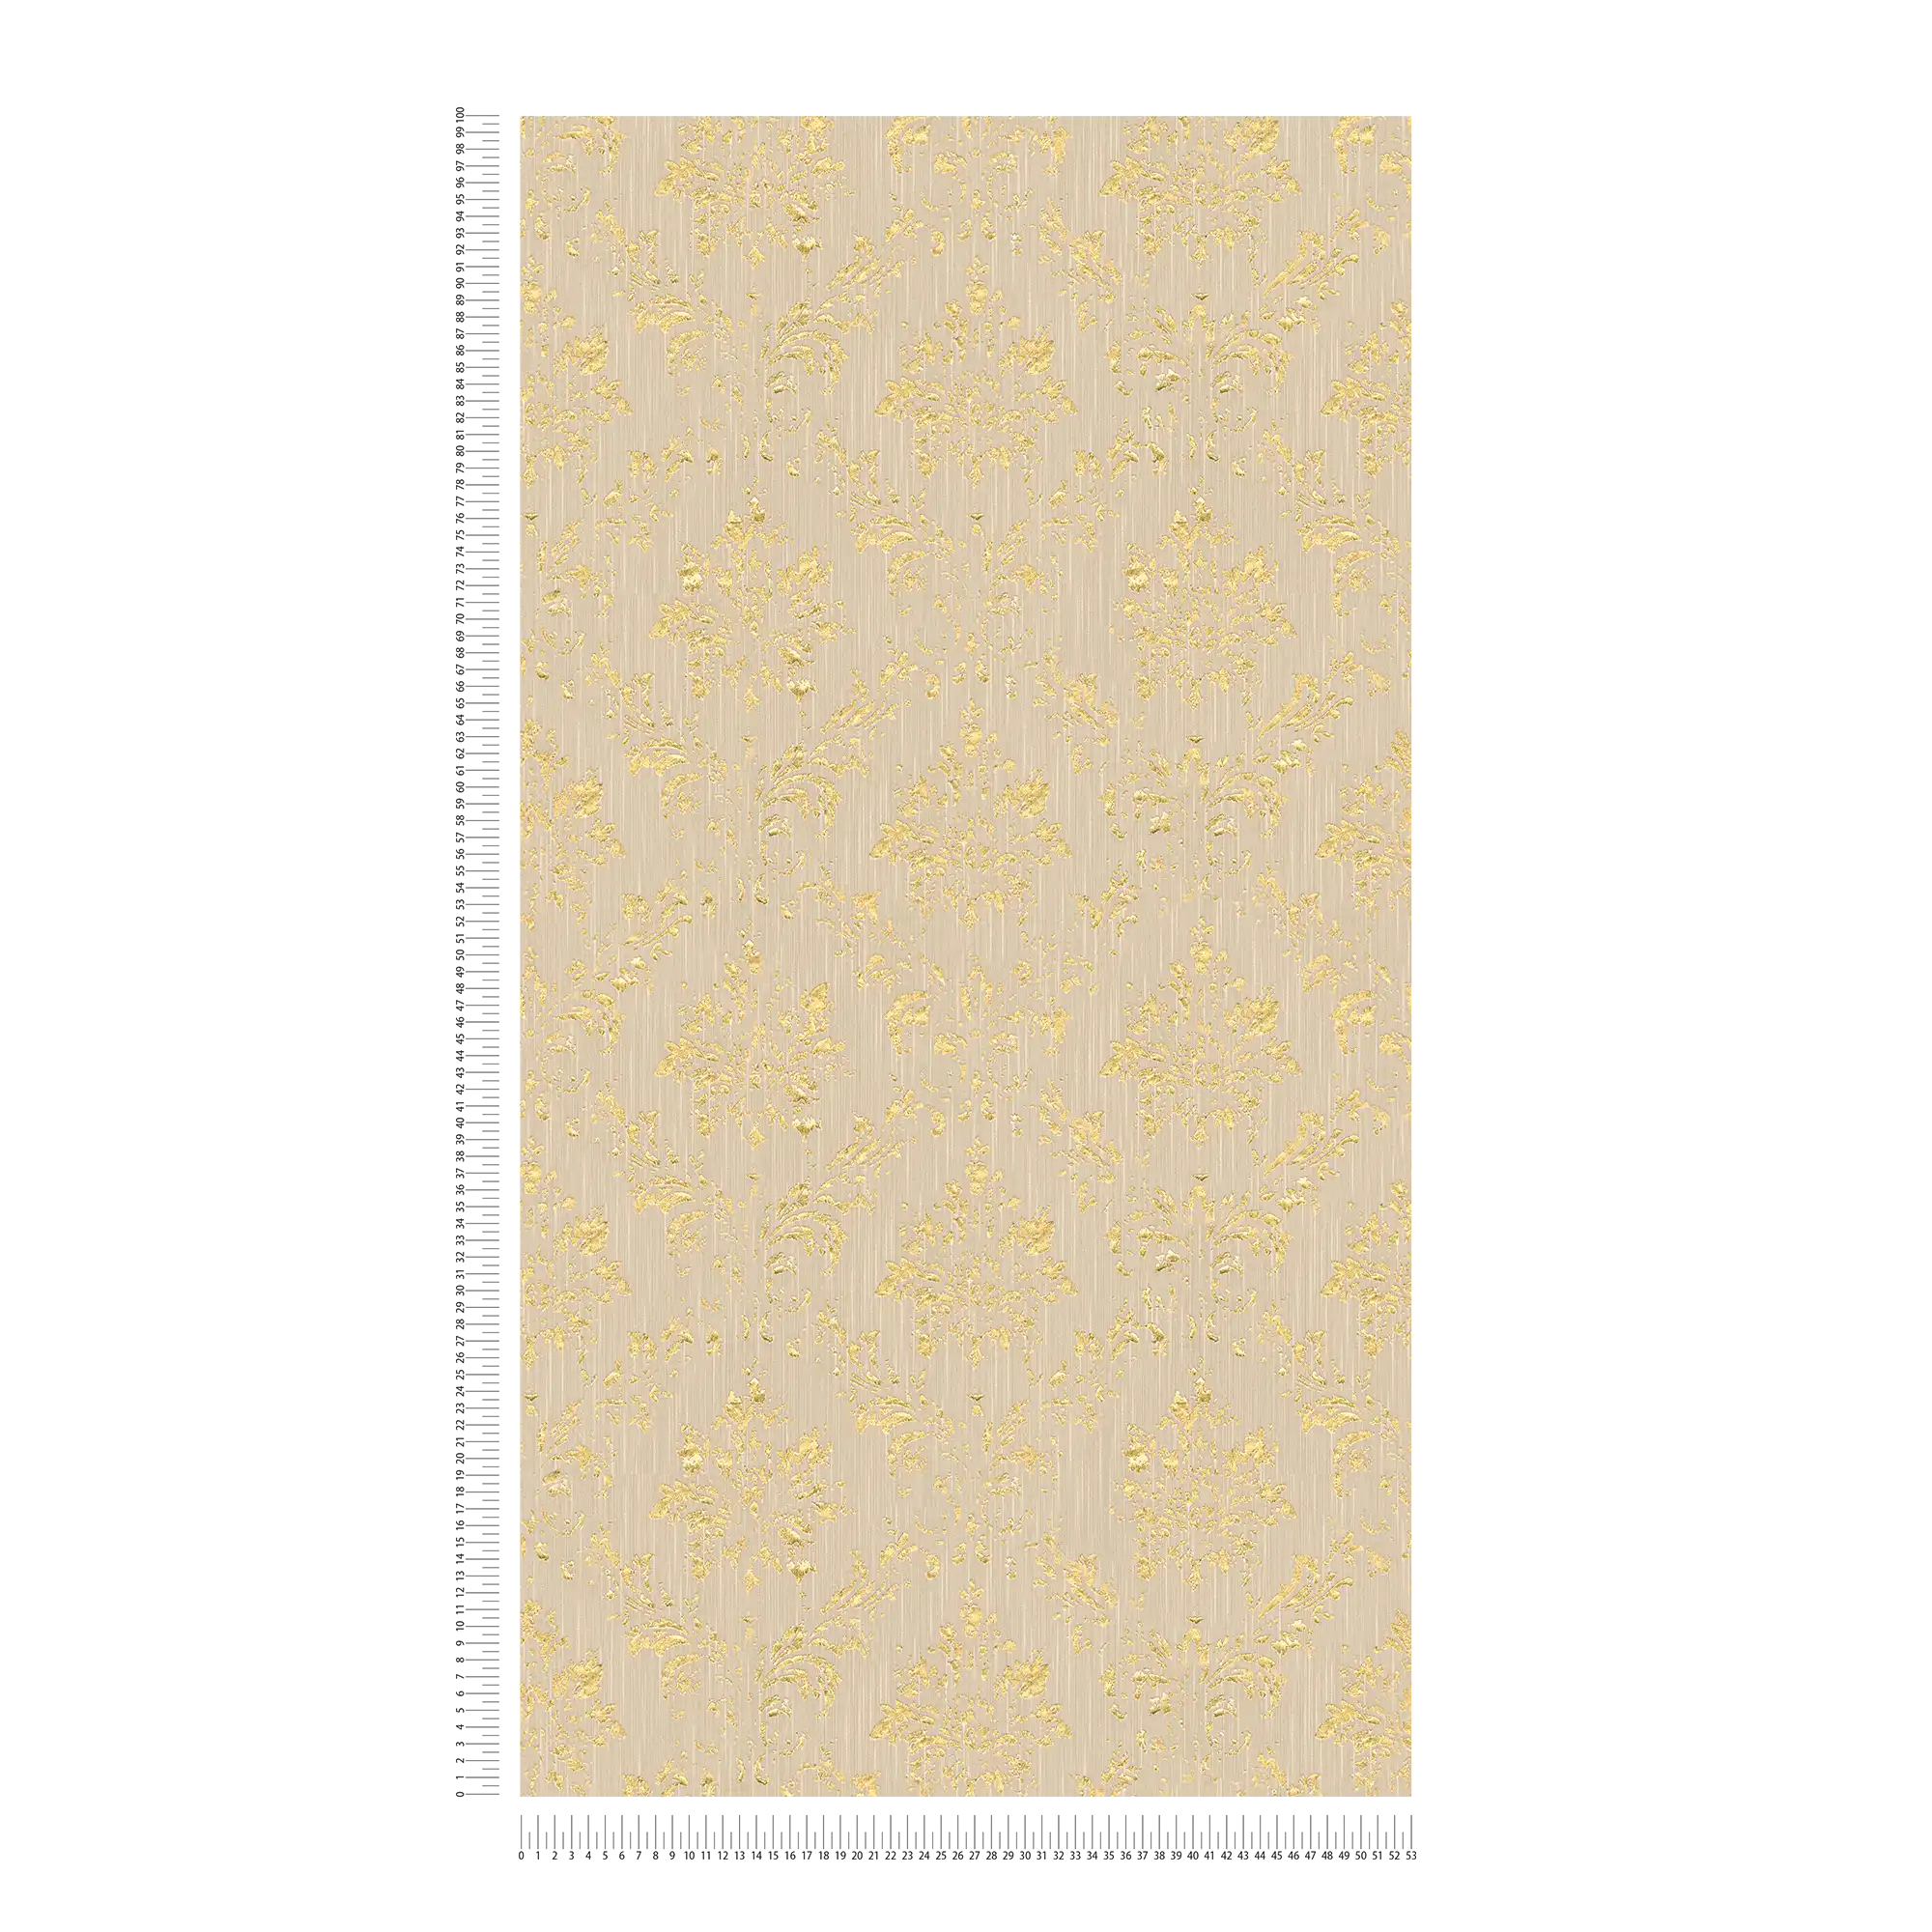             Wallpaper with gold ornaments in used look - beige, gold
        